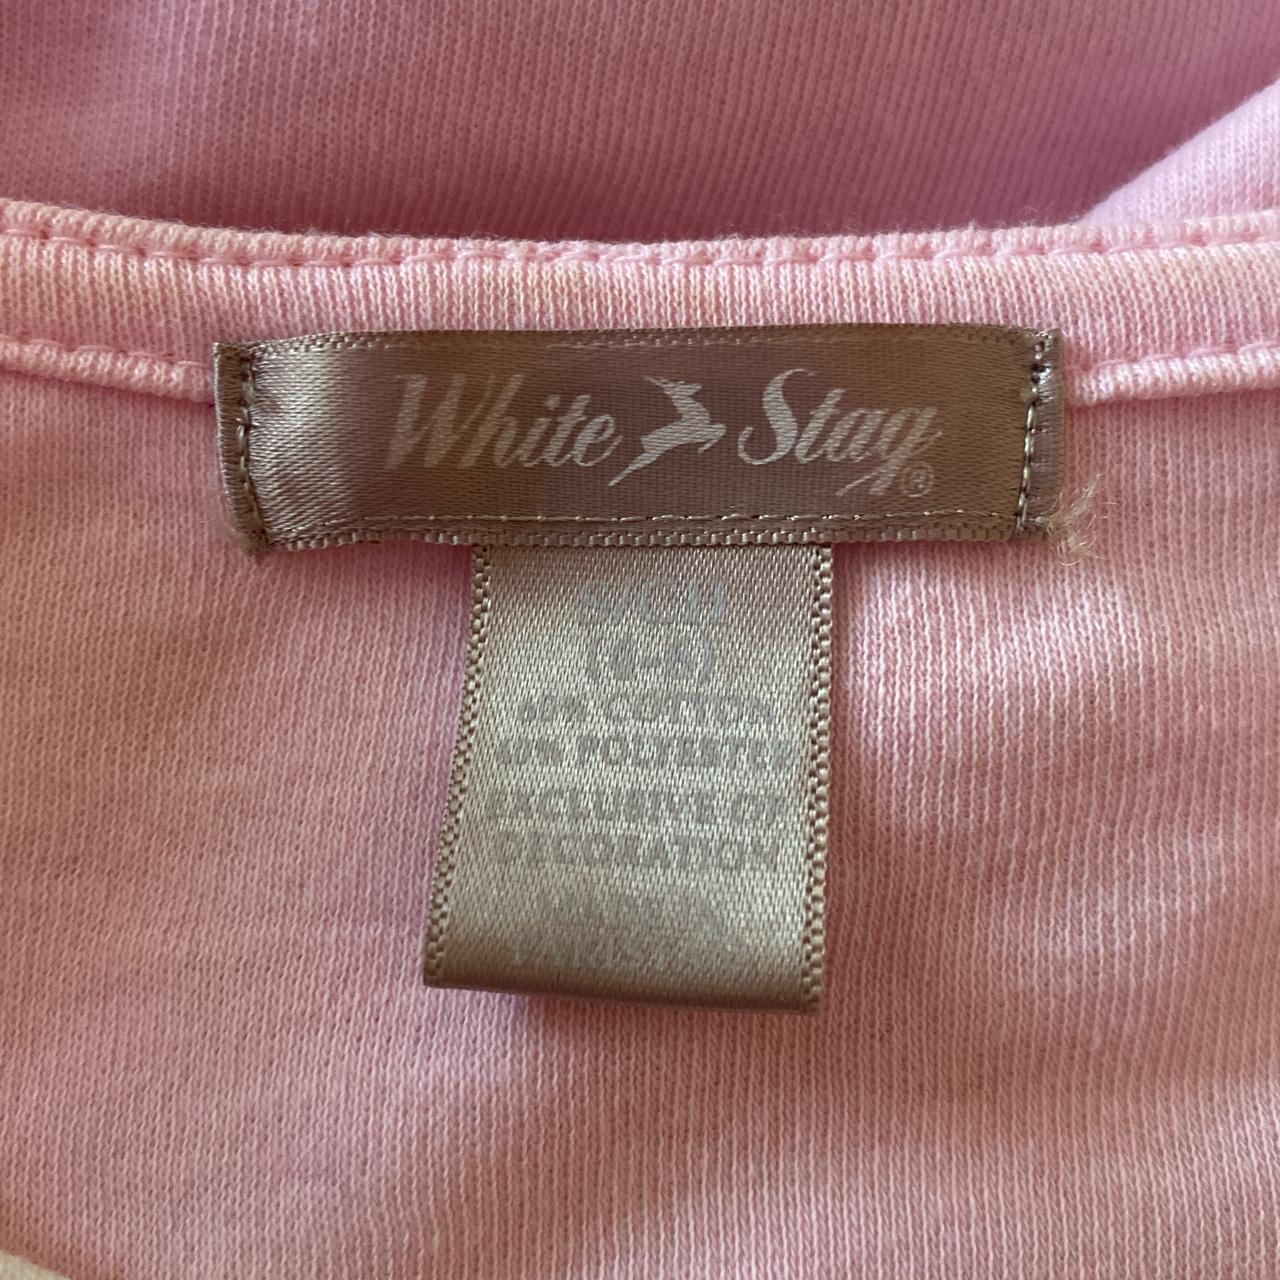 White Stag Women's Pink and White T-shirt (4)